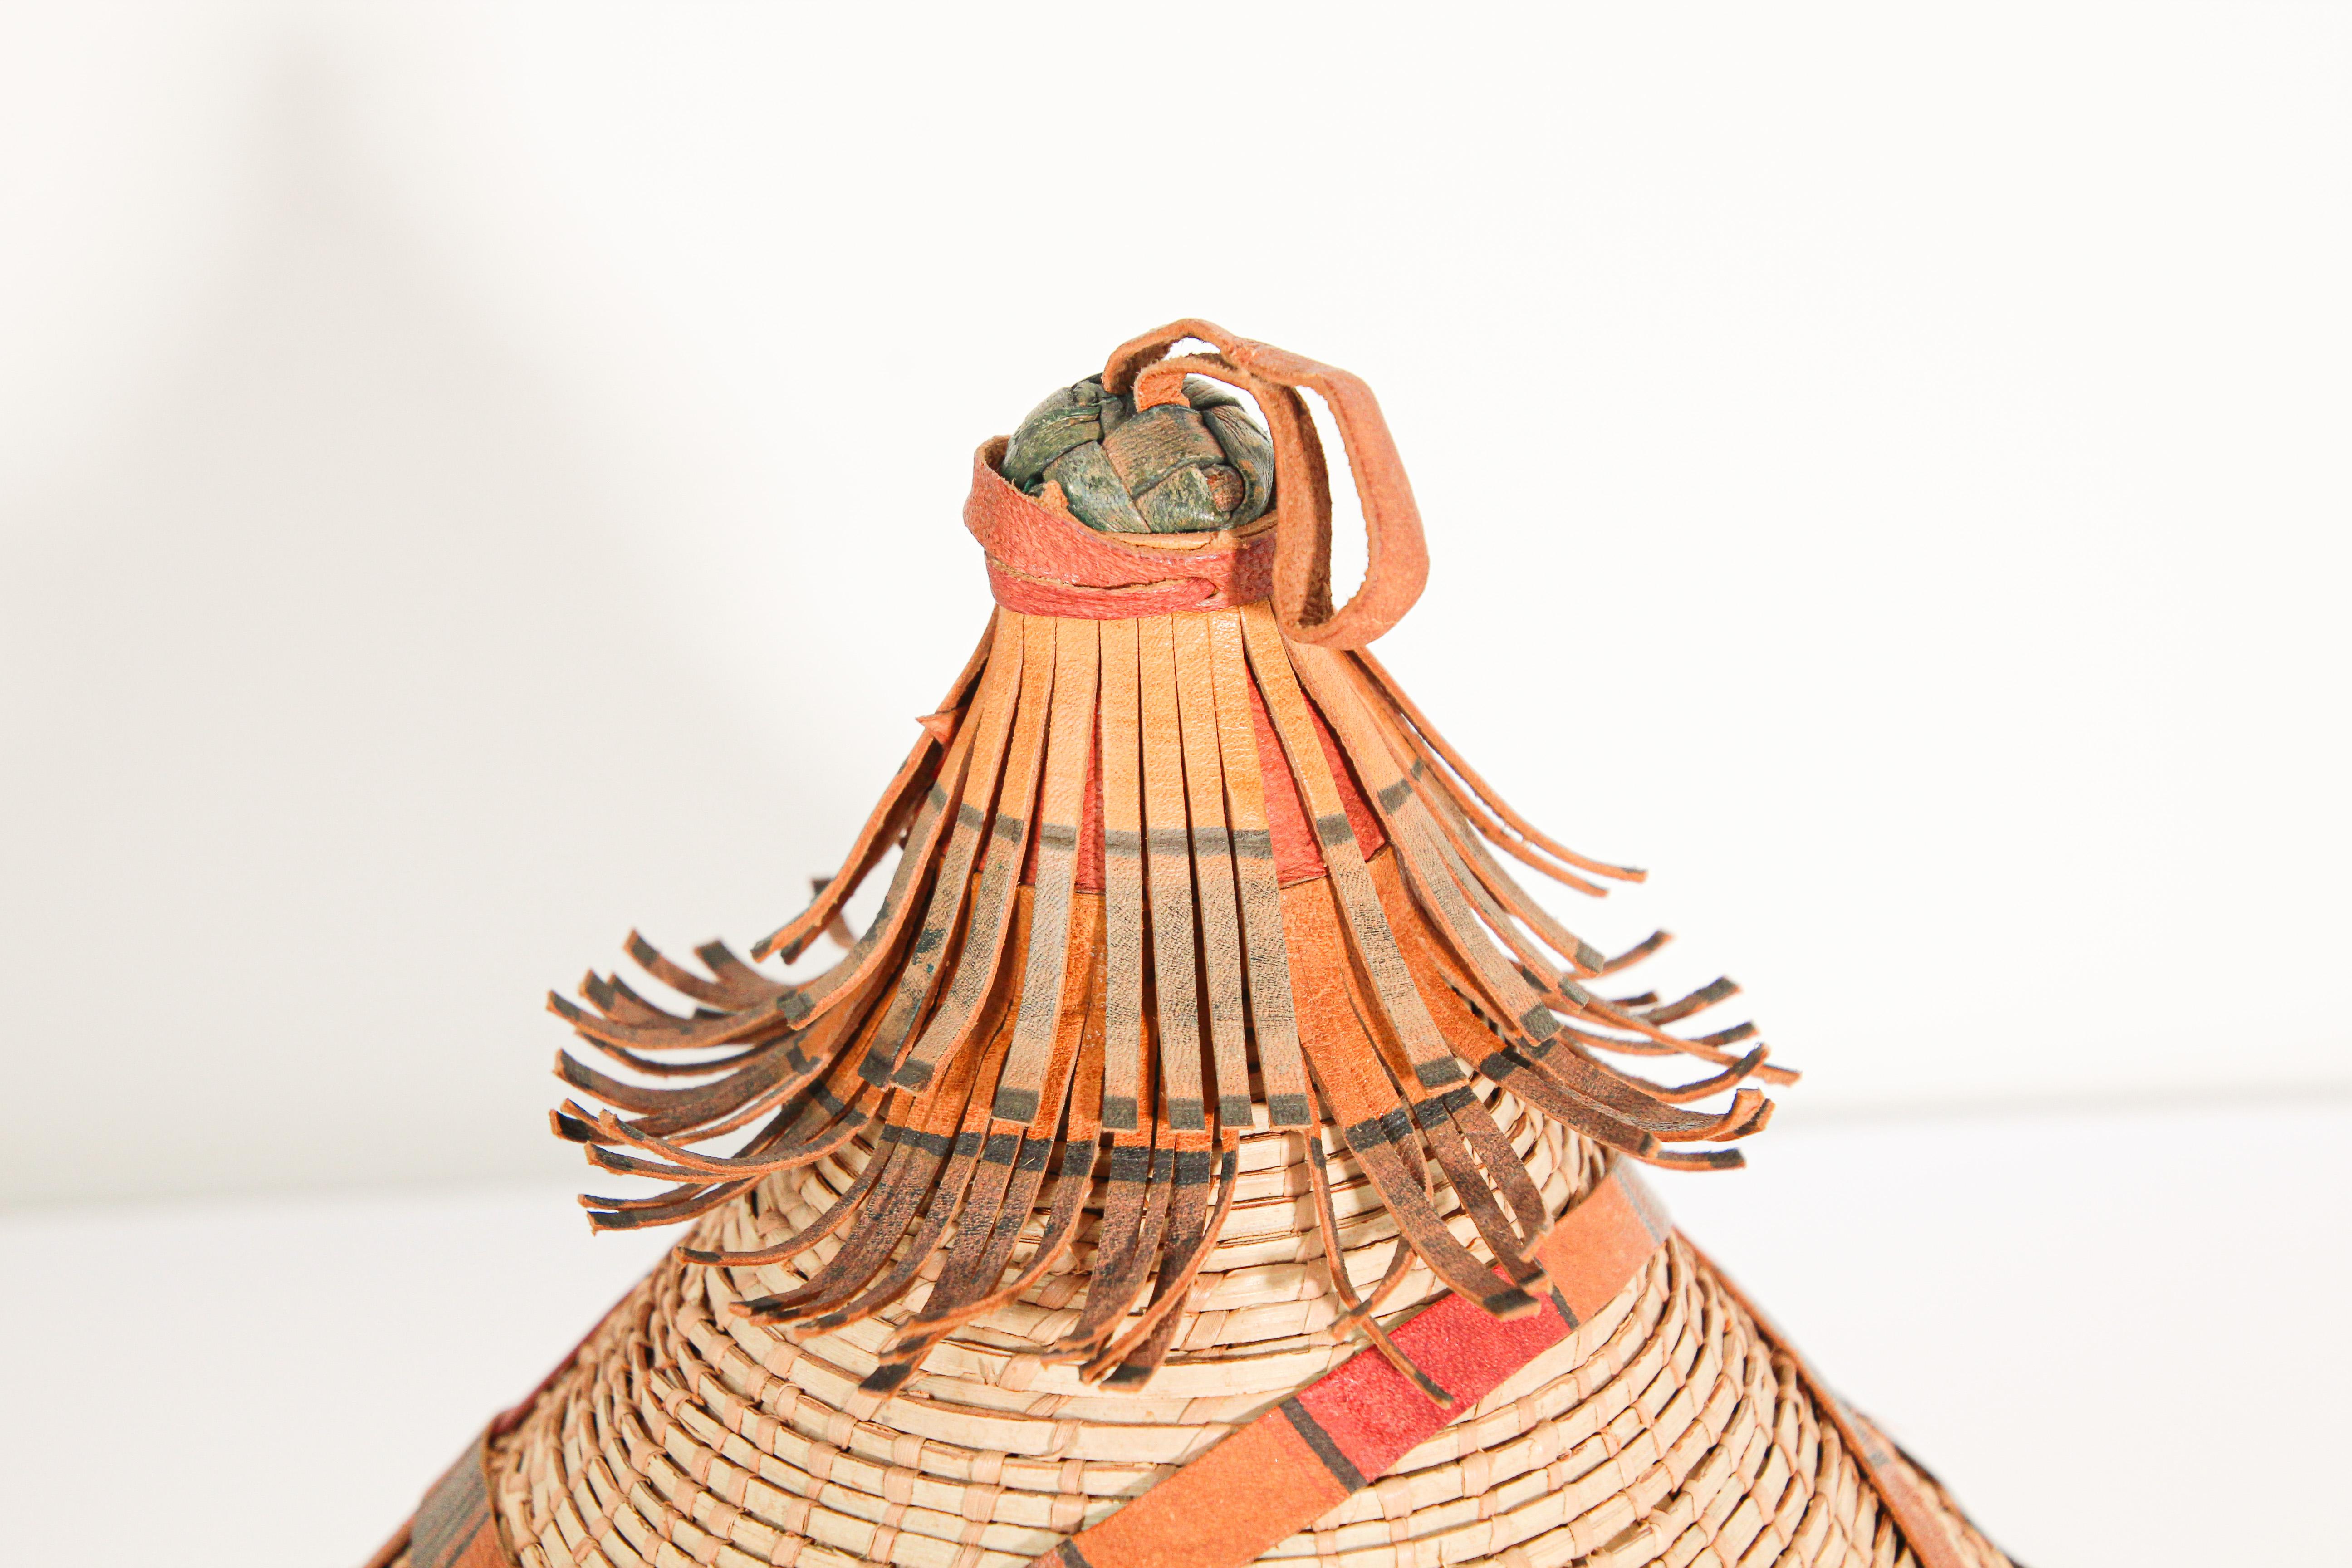 Conical Leather and Straw Tribal Fulani Hat, Mali West Africa For Sale 1